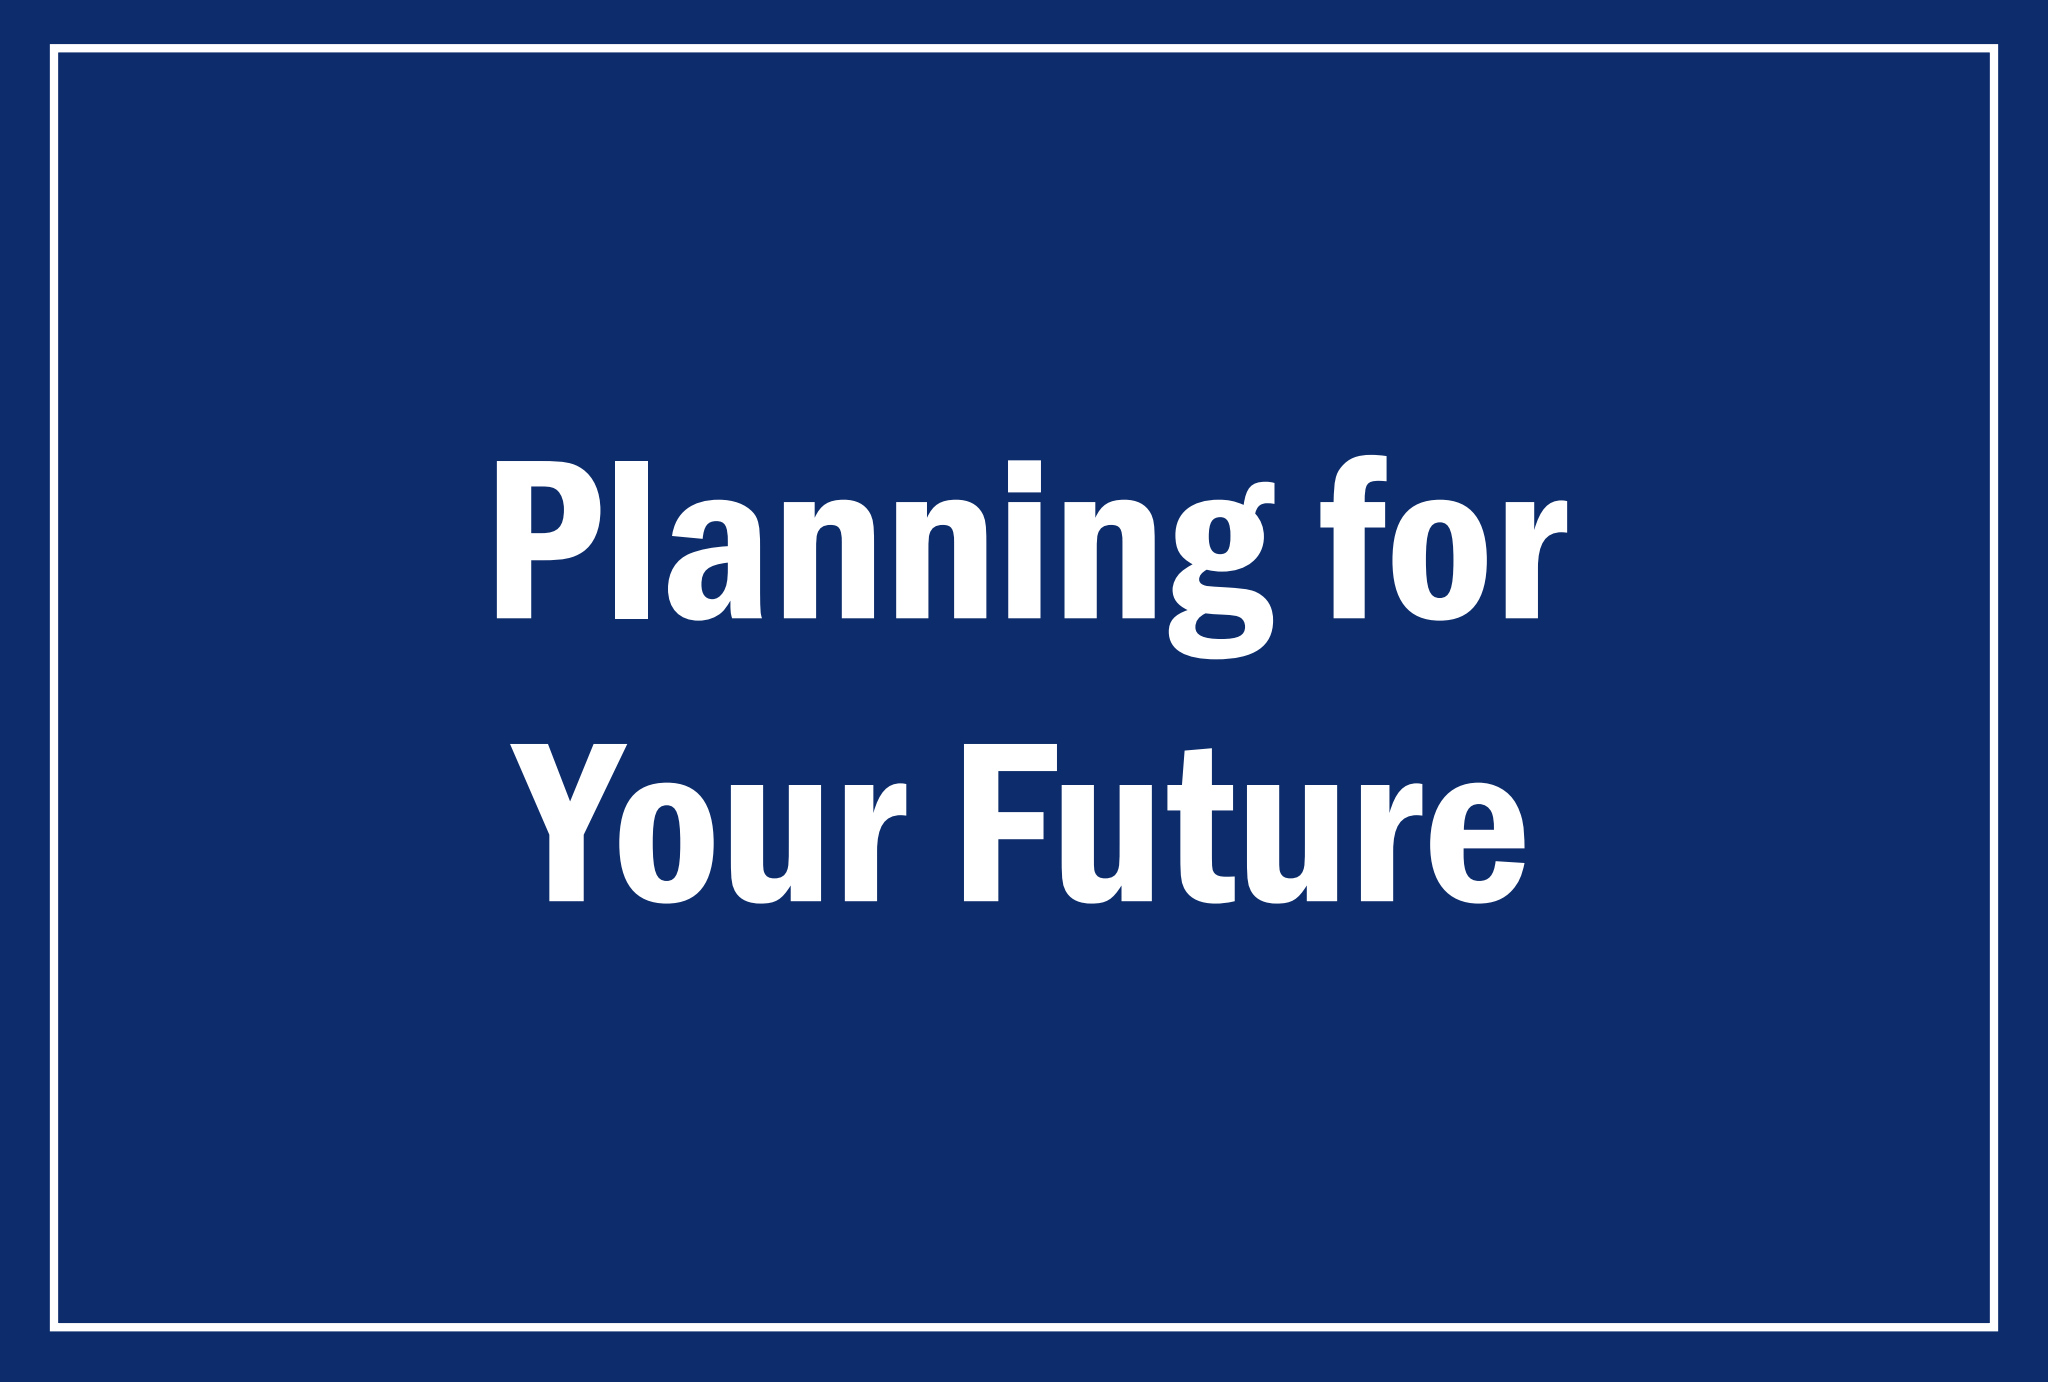 Planning for Your Future